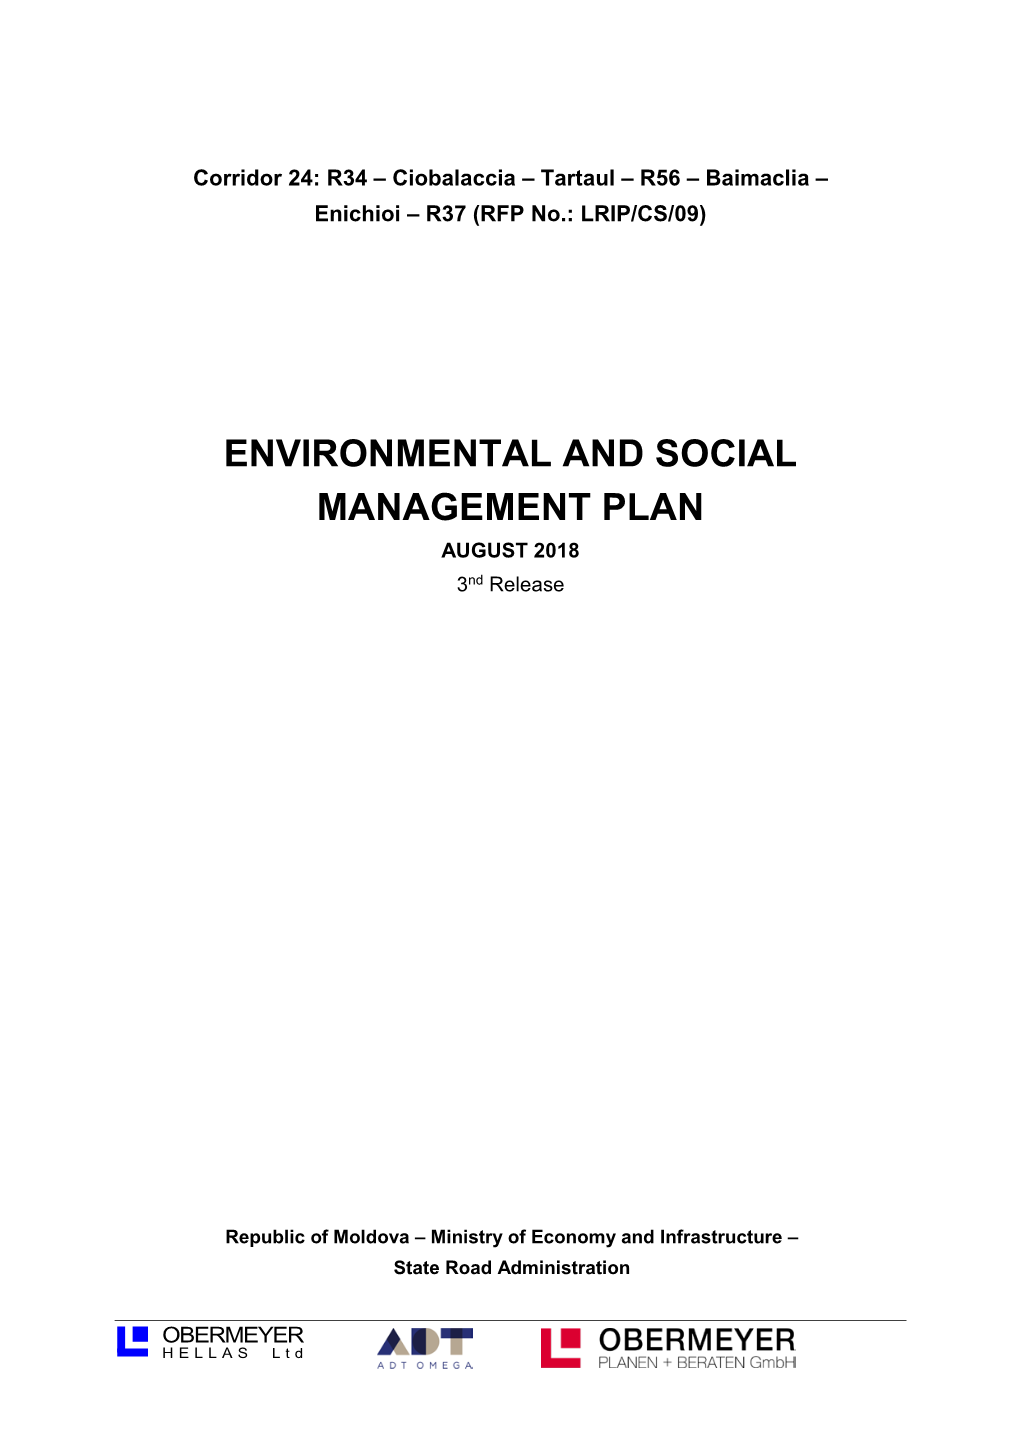 ENVIRONMENTAL and SOCIAL MANAGEMENT PLAN AUGUST 2018 3Nd Release